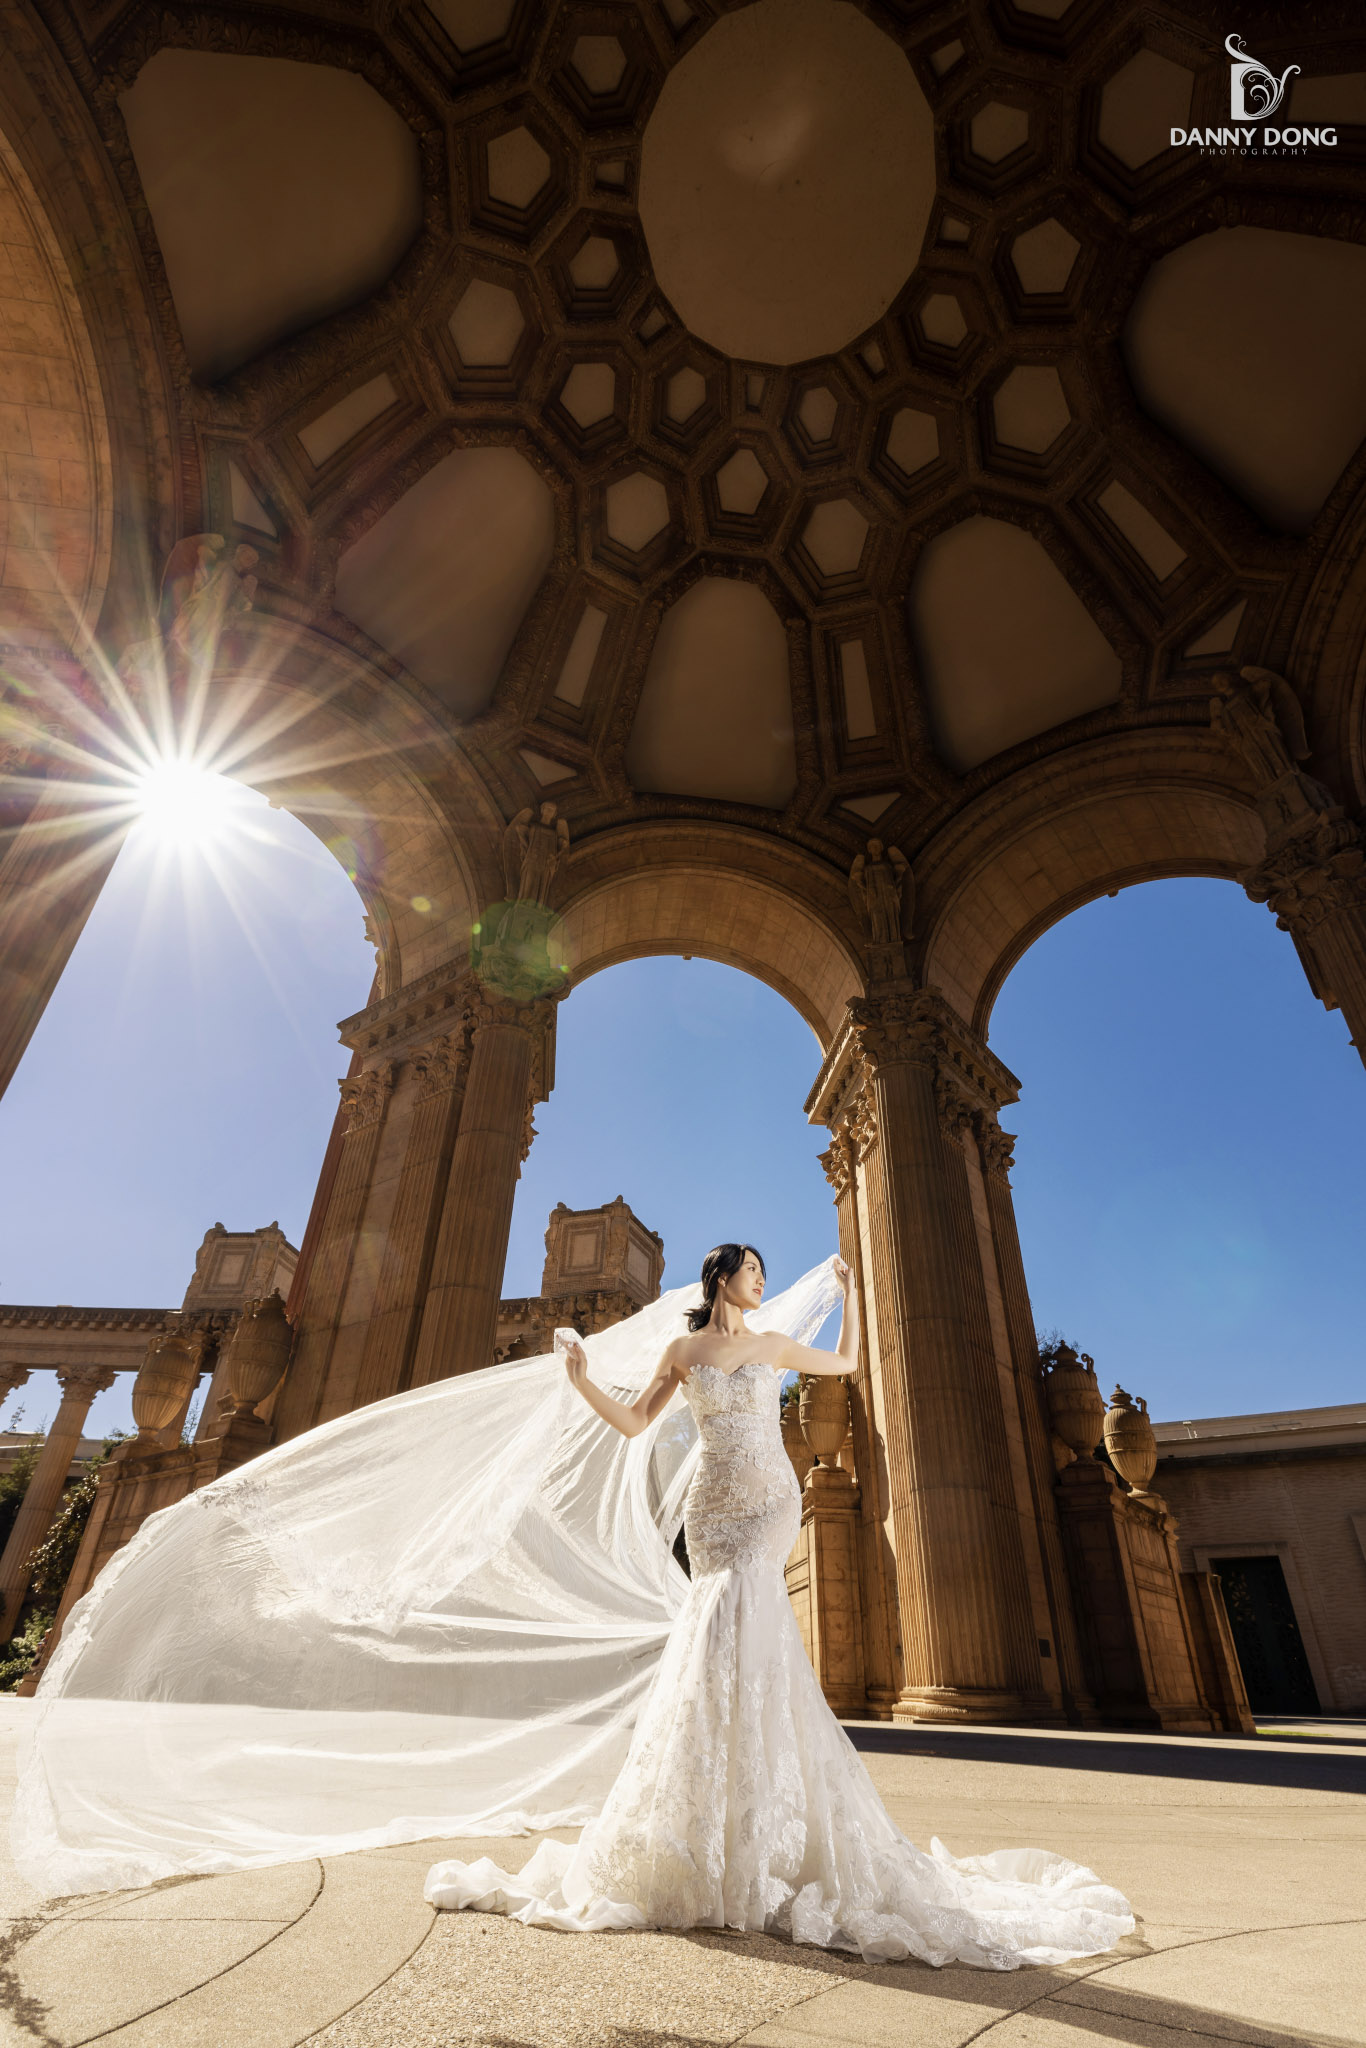 a bride in wedding attire in front of an arch with sun flares